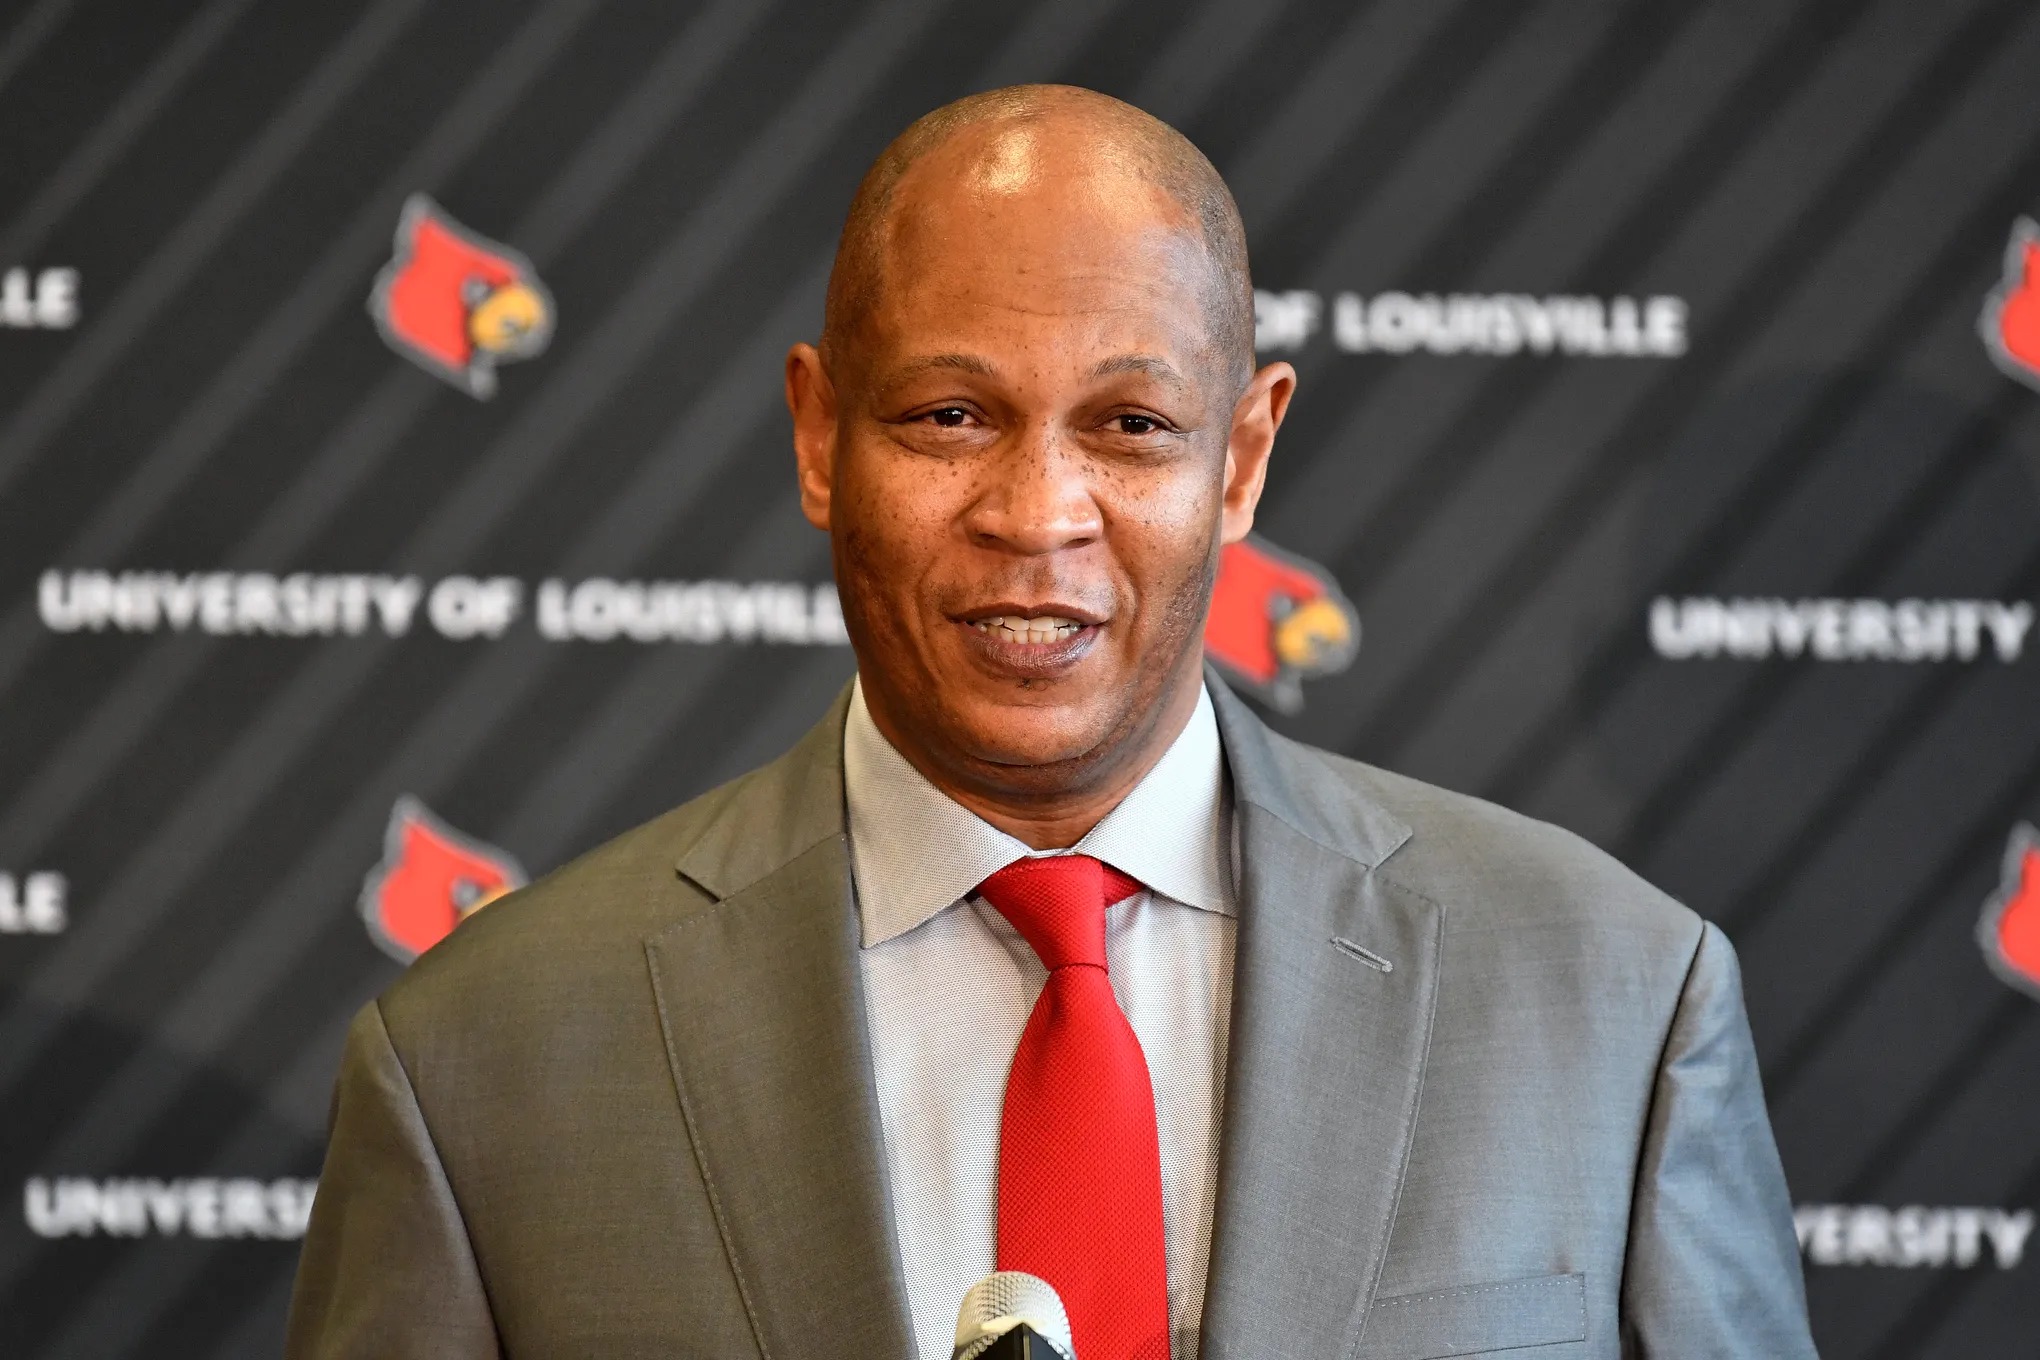 The Louisville have Agreed Two-Year Deal with NFL’s All-Time Kick Return Touchdown Leader for $145 million